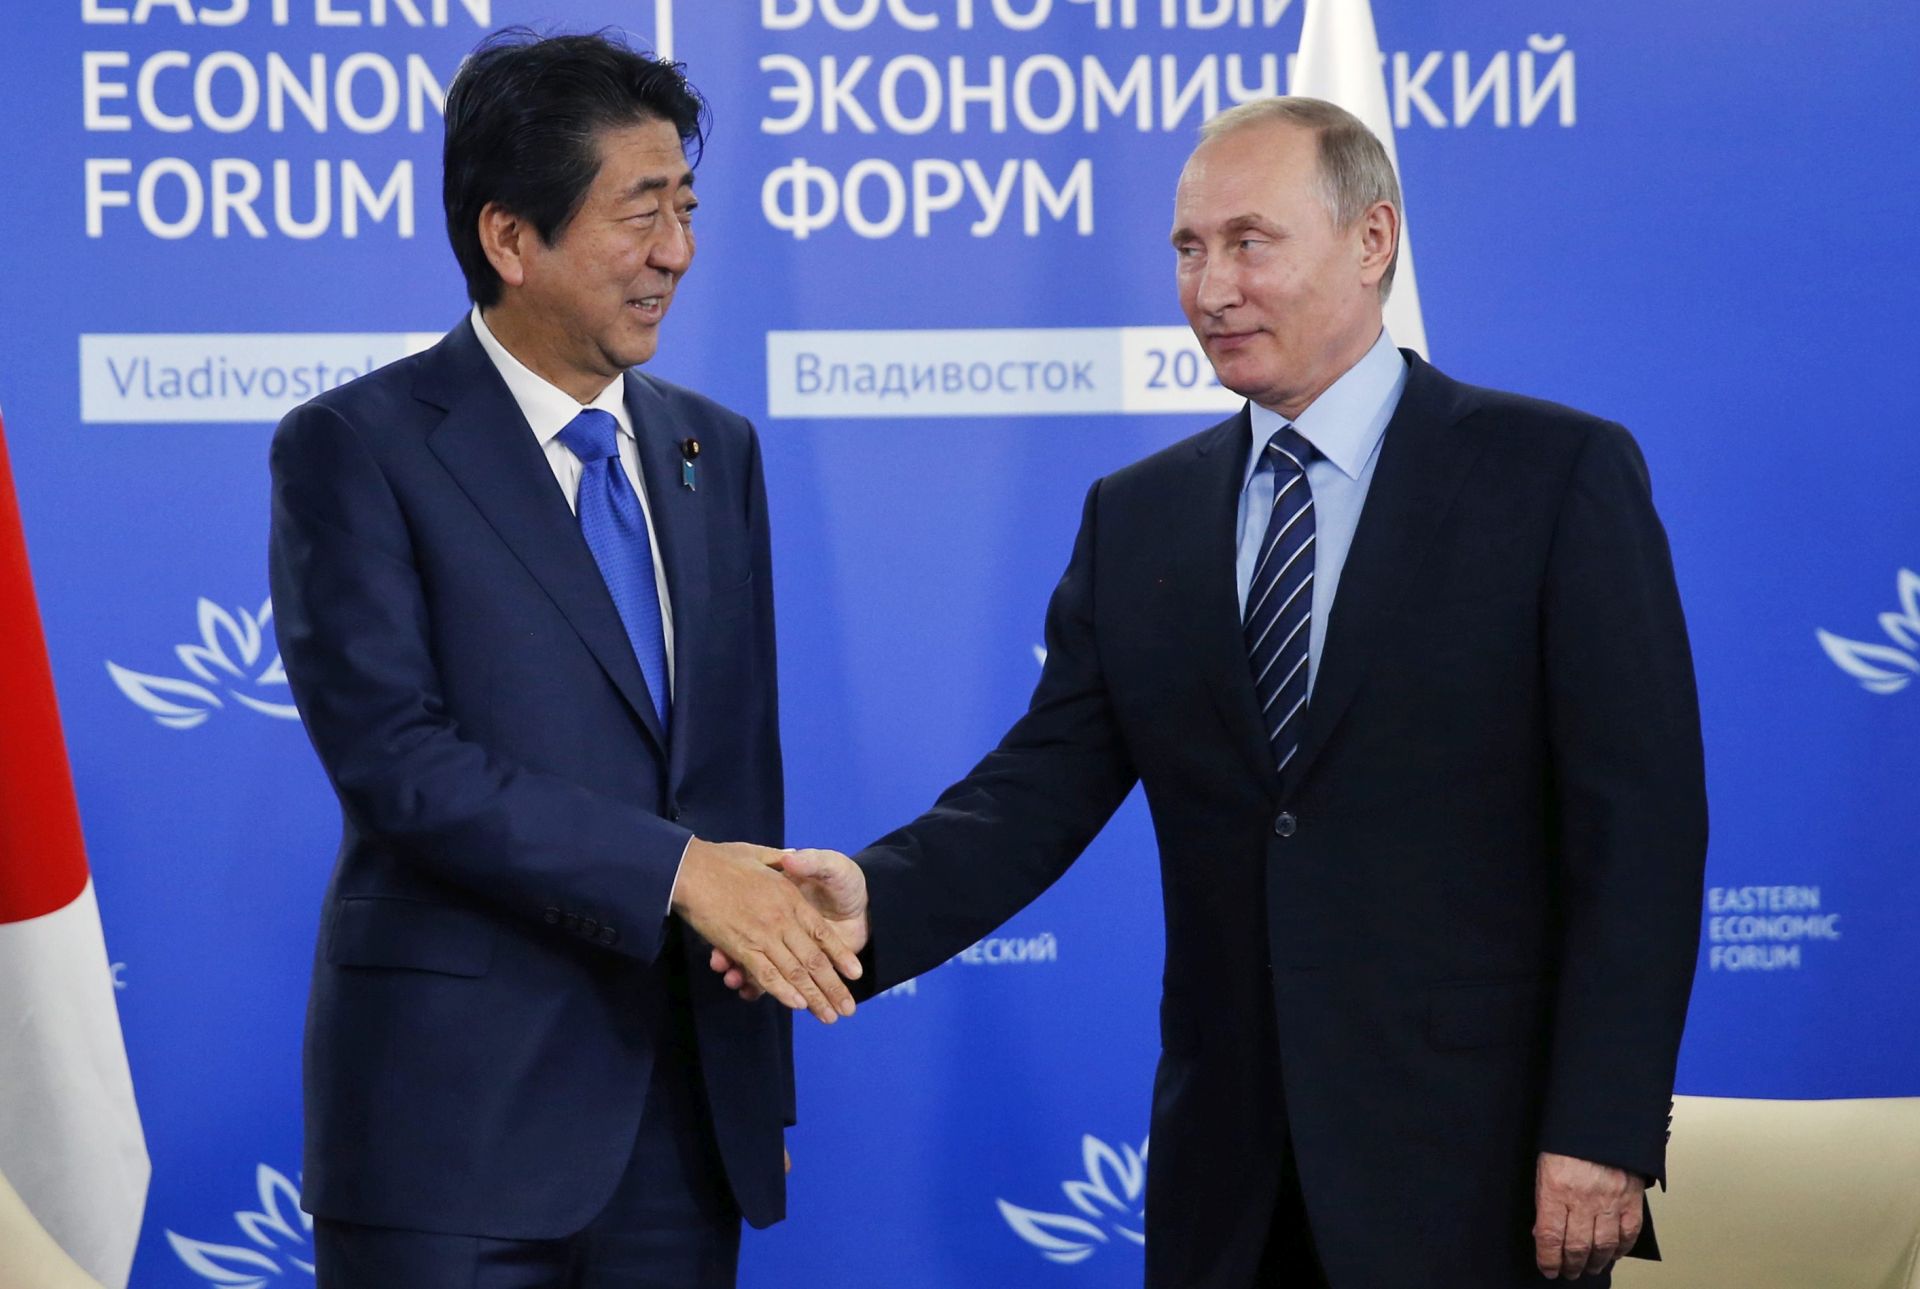 epa05519666 Russian President Vladimir Putin (R) shakes hands with Japanese Prime Minister Shinzo Abe (L) at the sidelines of the Eastern Economic Forum in Vladivostok, Russia 02 September 2016. The Eastern Economic Forum 2016 is held in Vladivostok on 02 and 03 September by decree of President Putin and aimed to attract billions of US dollars investments into the Russian economy.  EPA/YURI KOCHETKOV